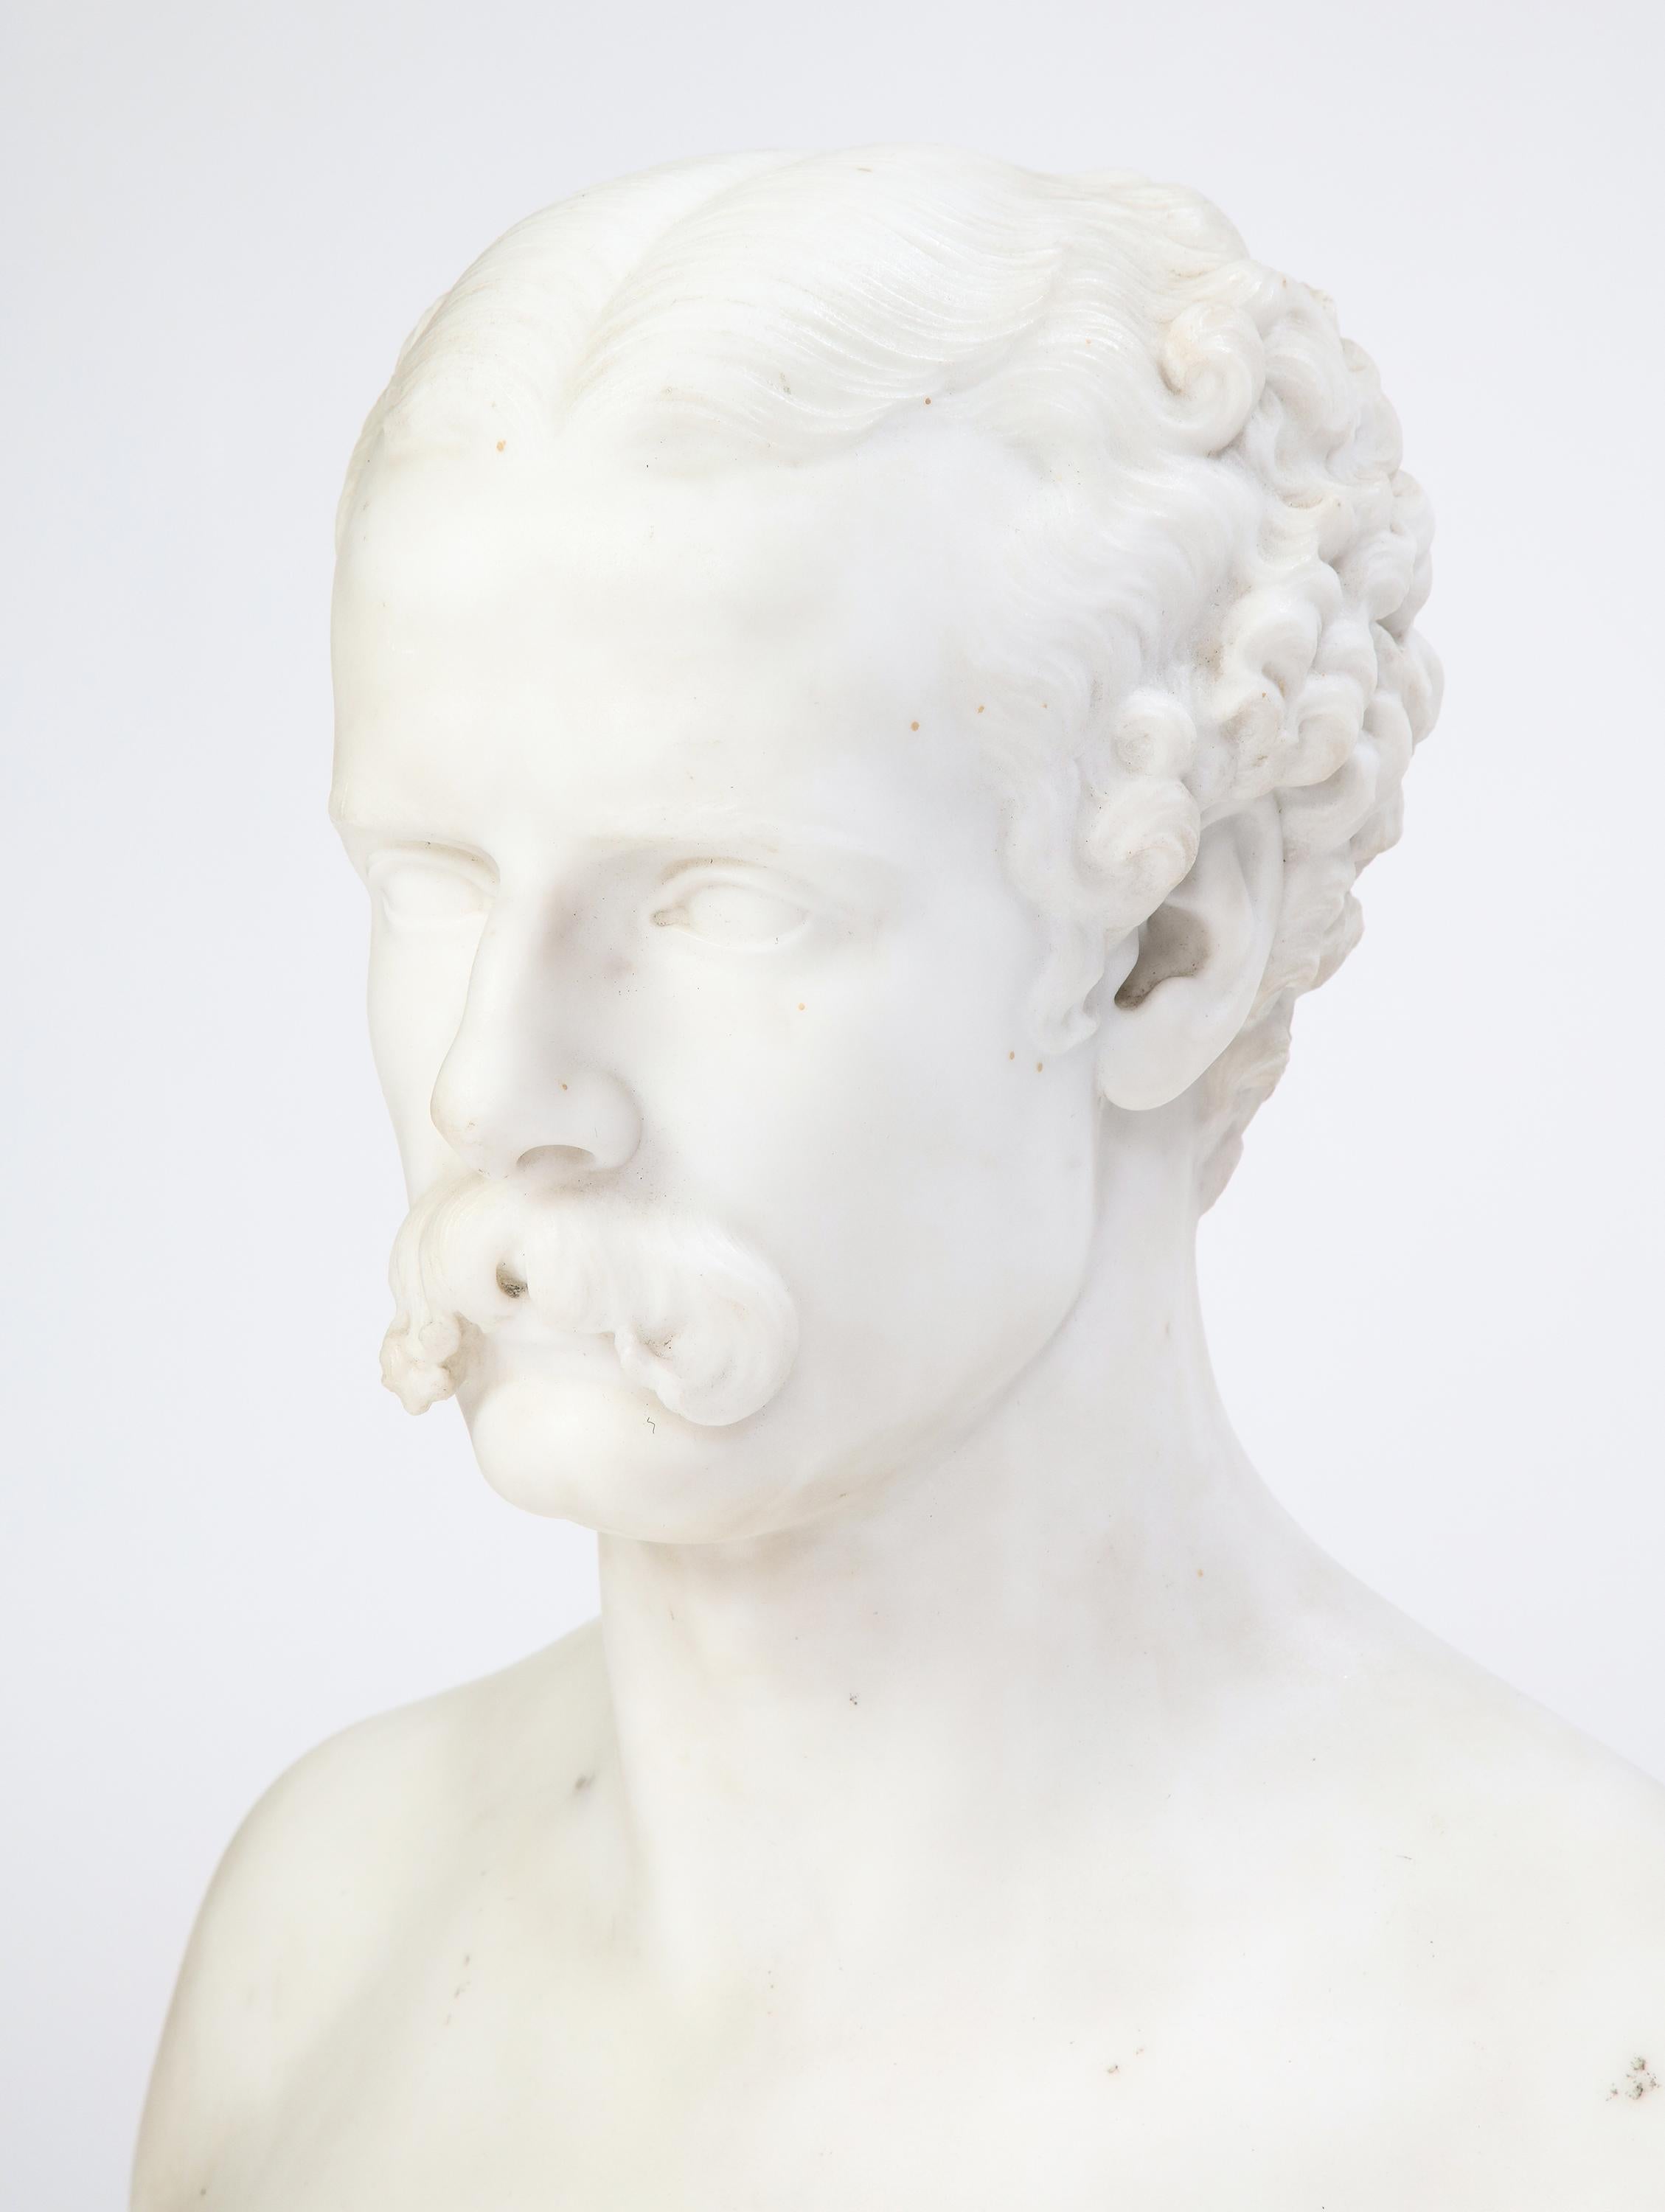 This work, a Baroque style carved white marble bust of a man with Classical features raised on a decorative turned plinth, is an excellent example of an artwork probably carved in Italy during the explosion of decorative sculpture in the 19th and